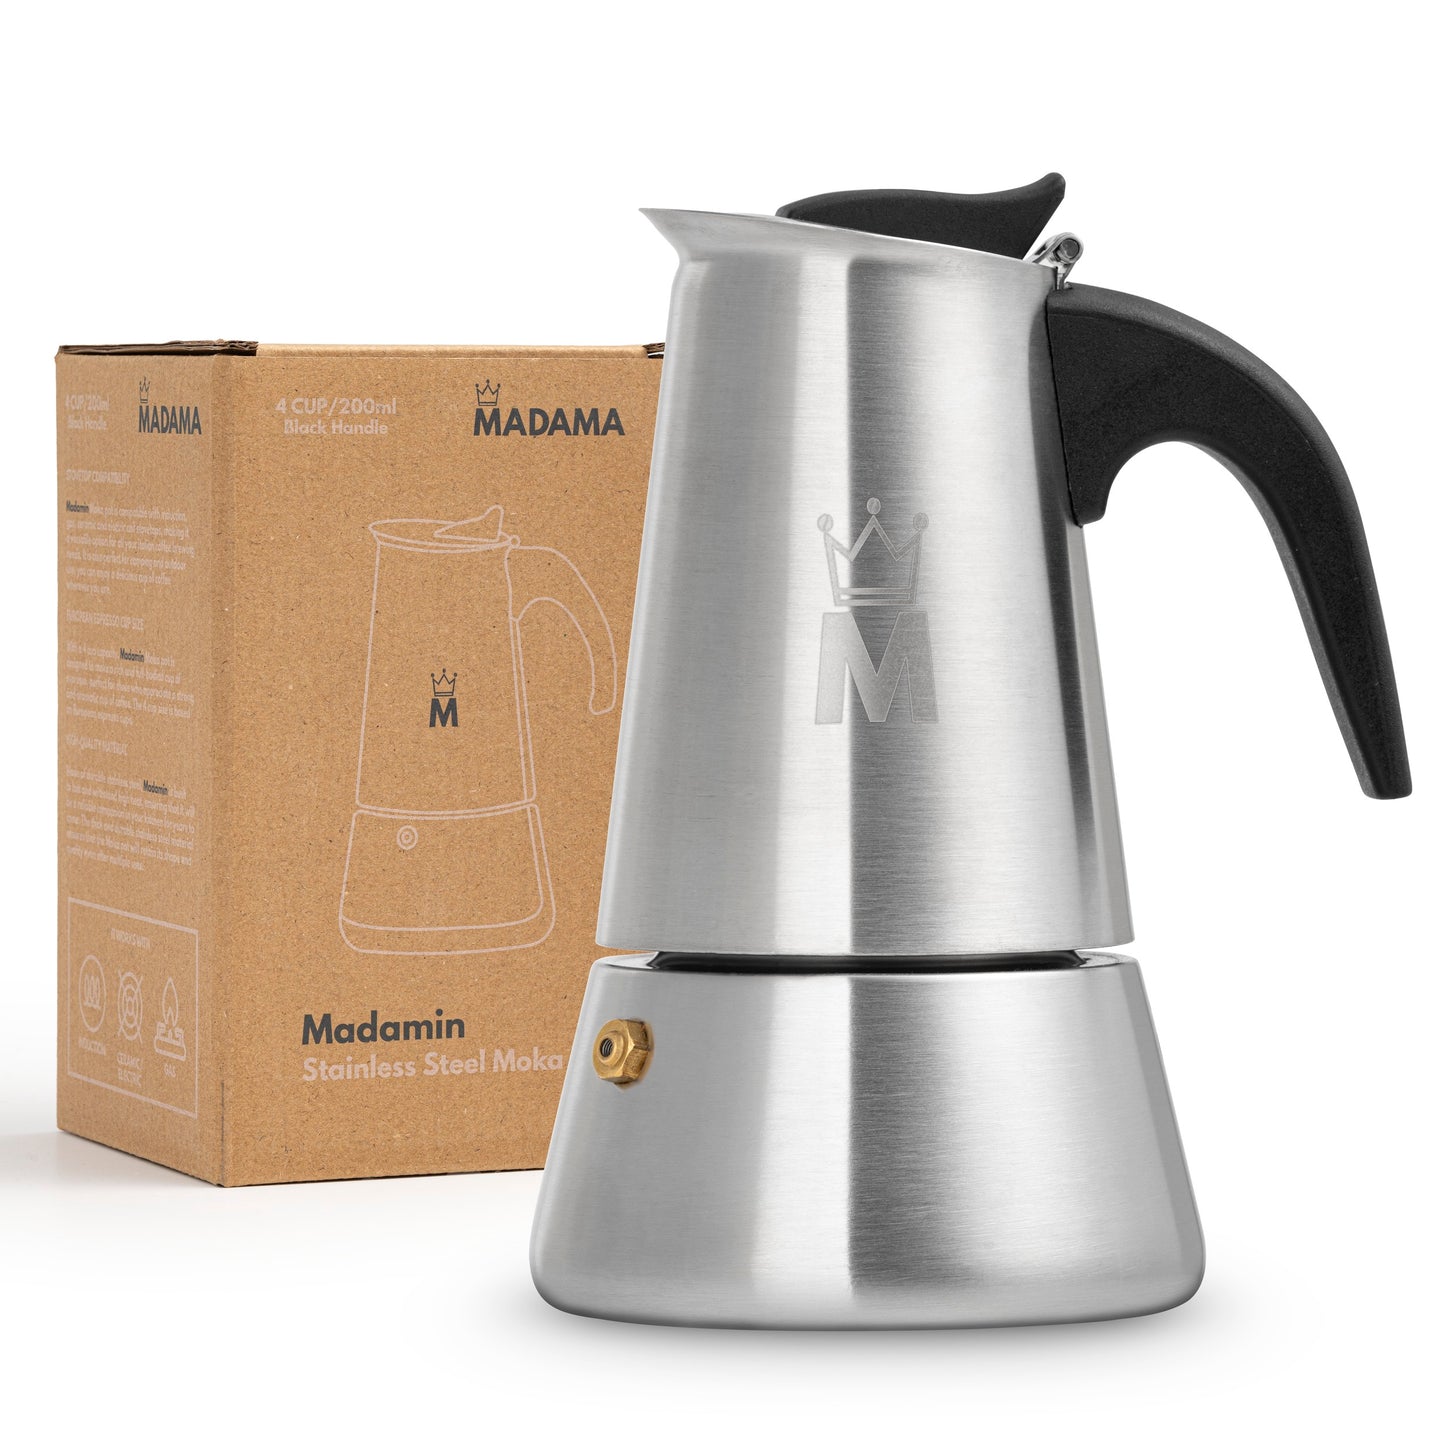 Madamin - Moka Pot for Induction, Gas or Electric Stoves - Stainless Steel - 4 Cups, Black Handle